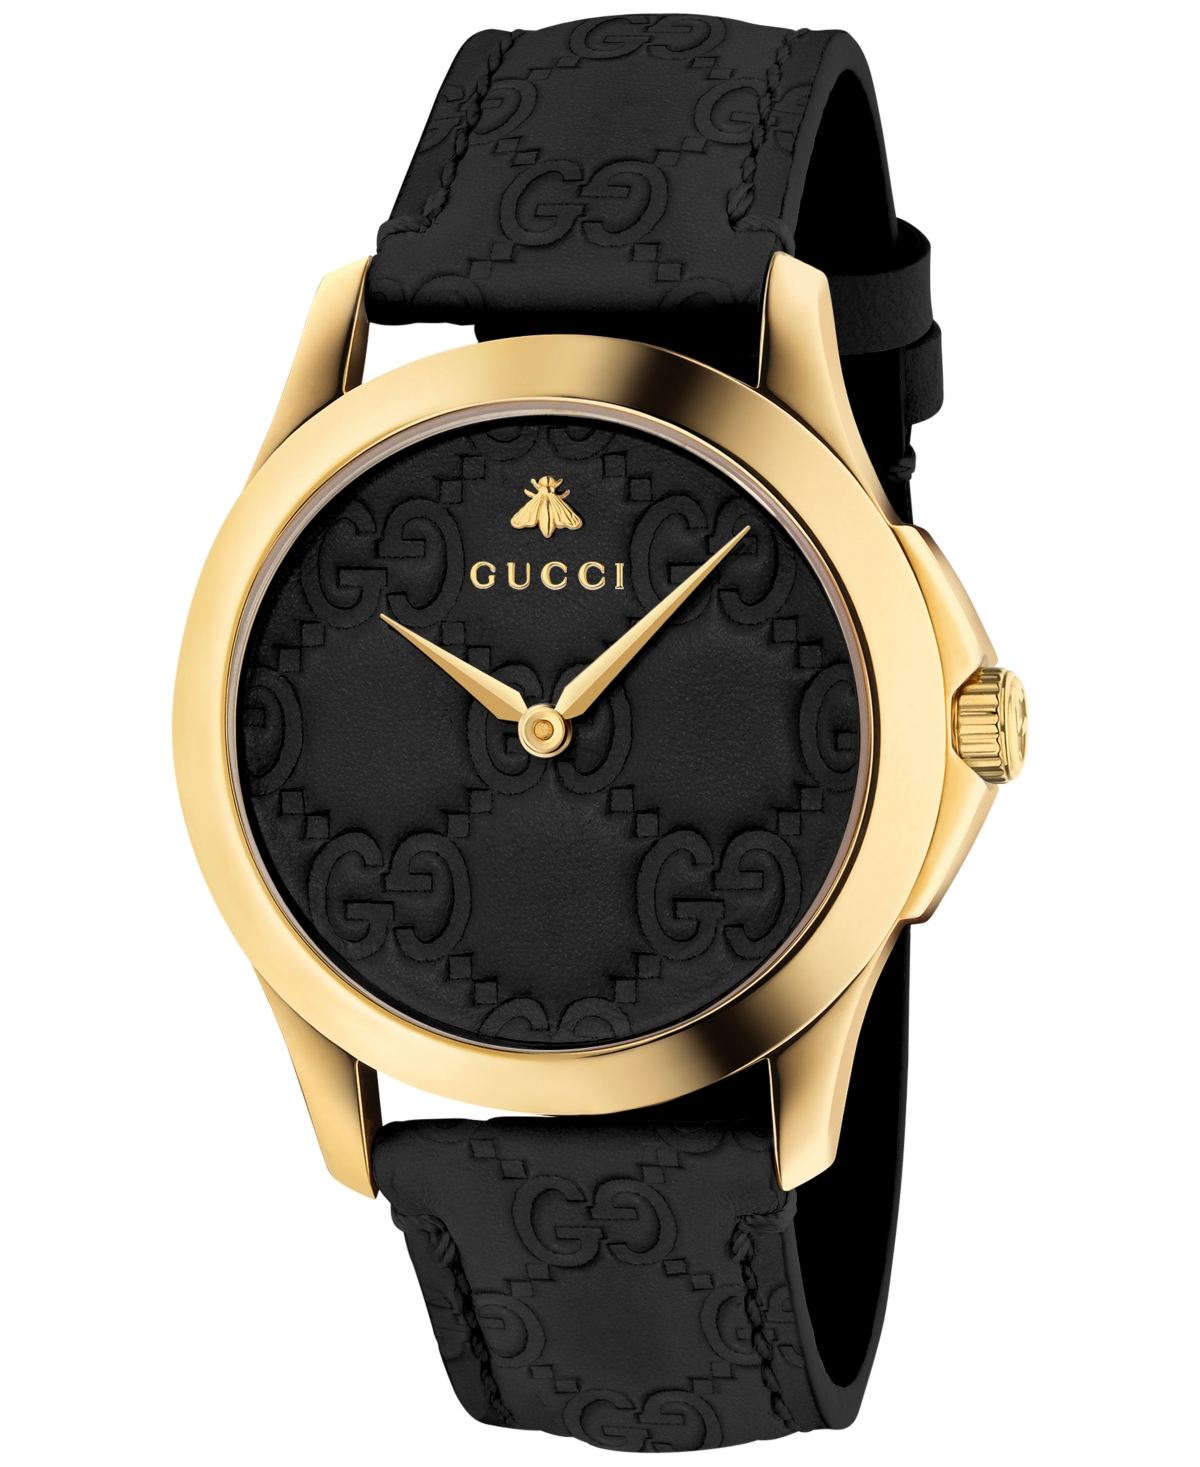 Gucci Men's G-timeless Black Leather Strap Watch 38mm